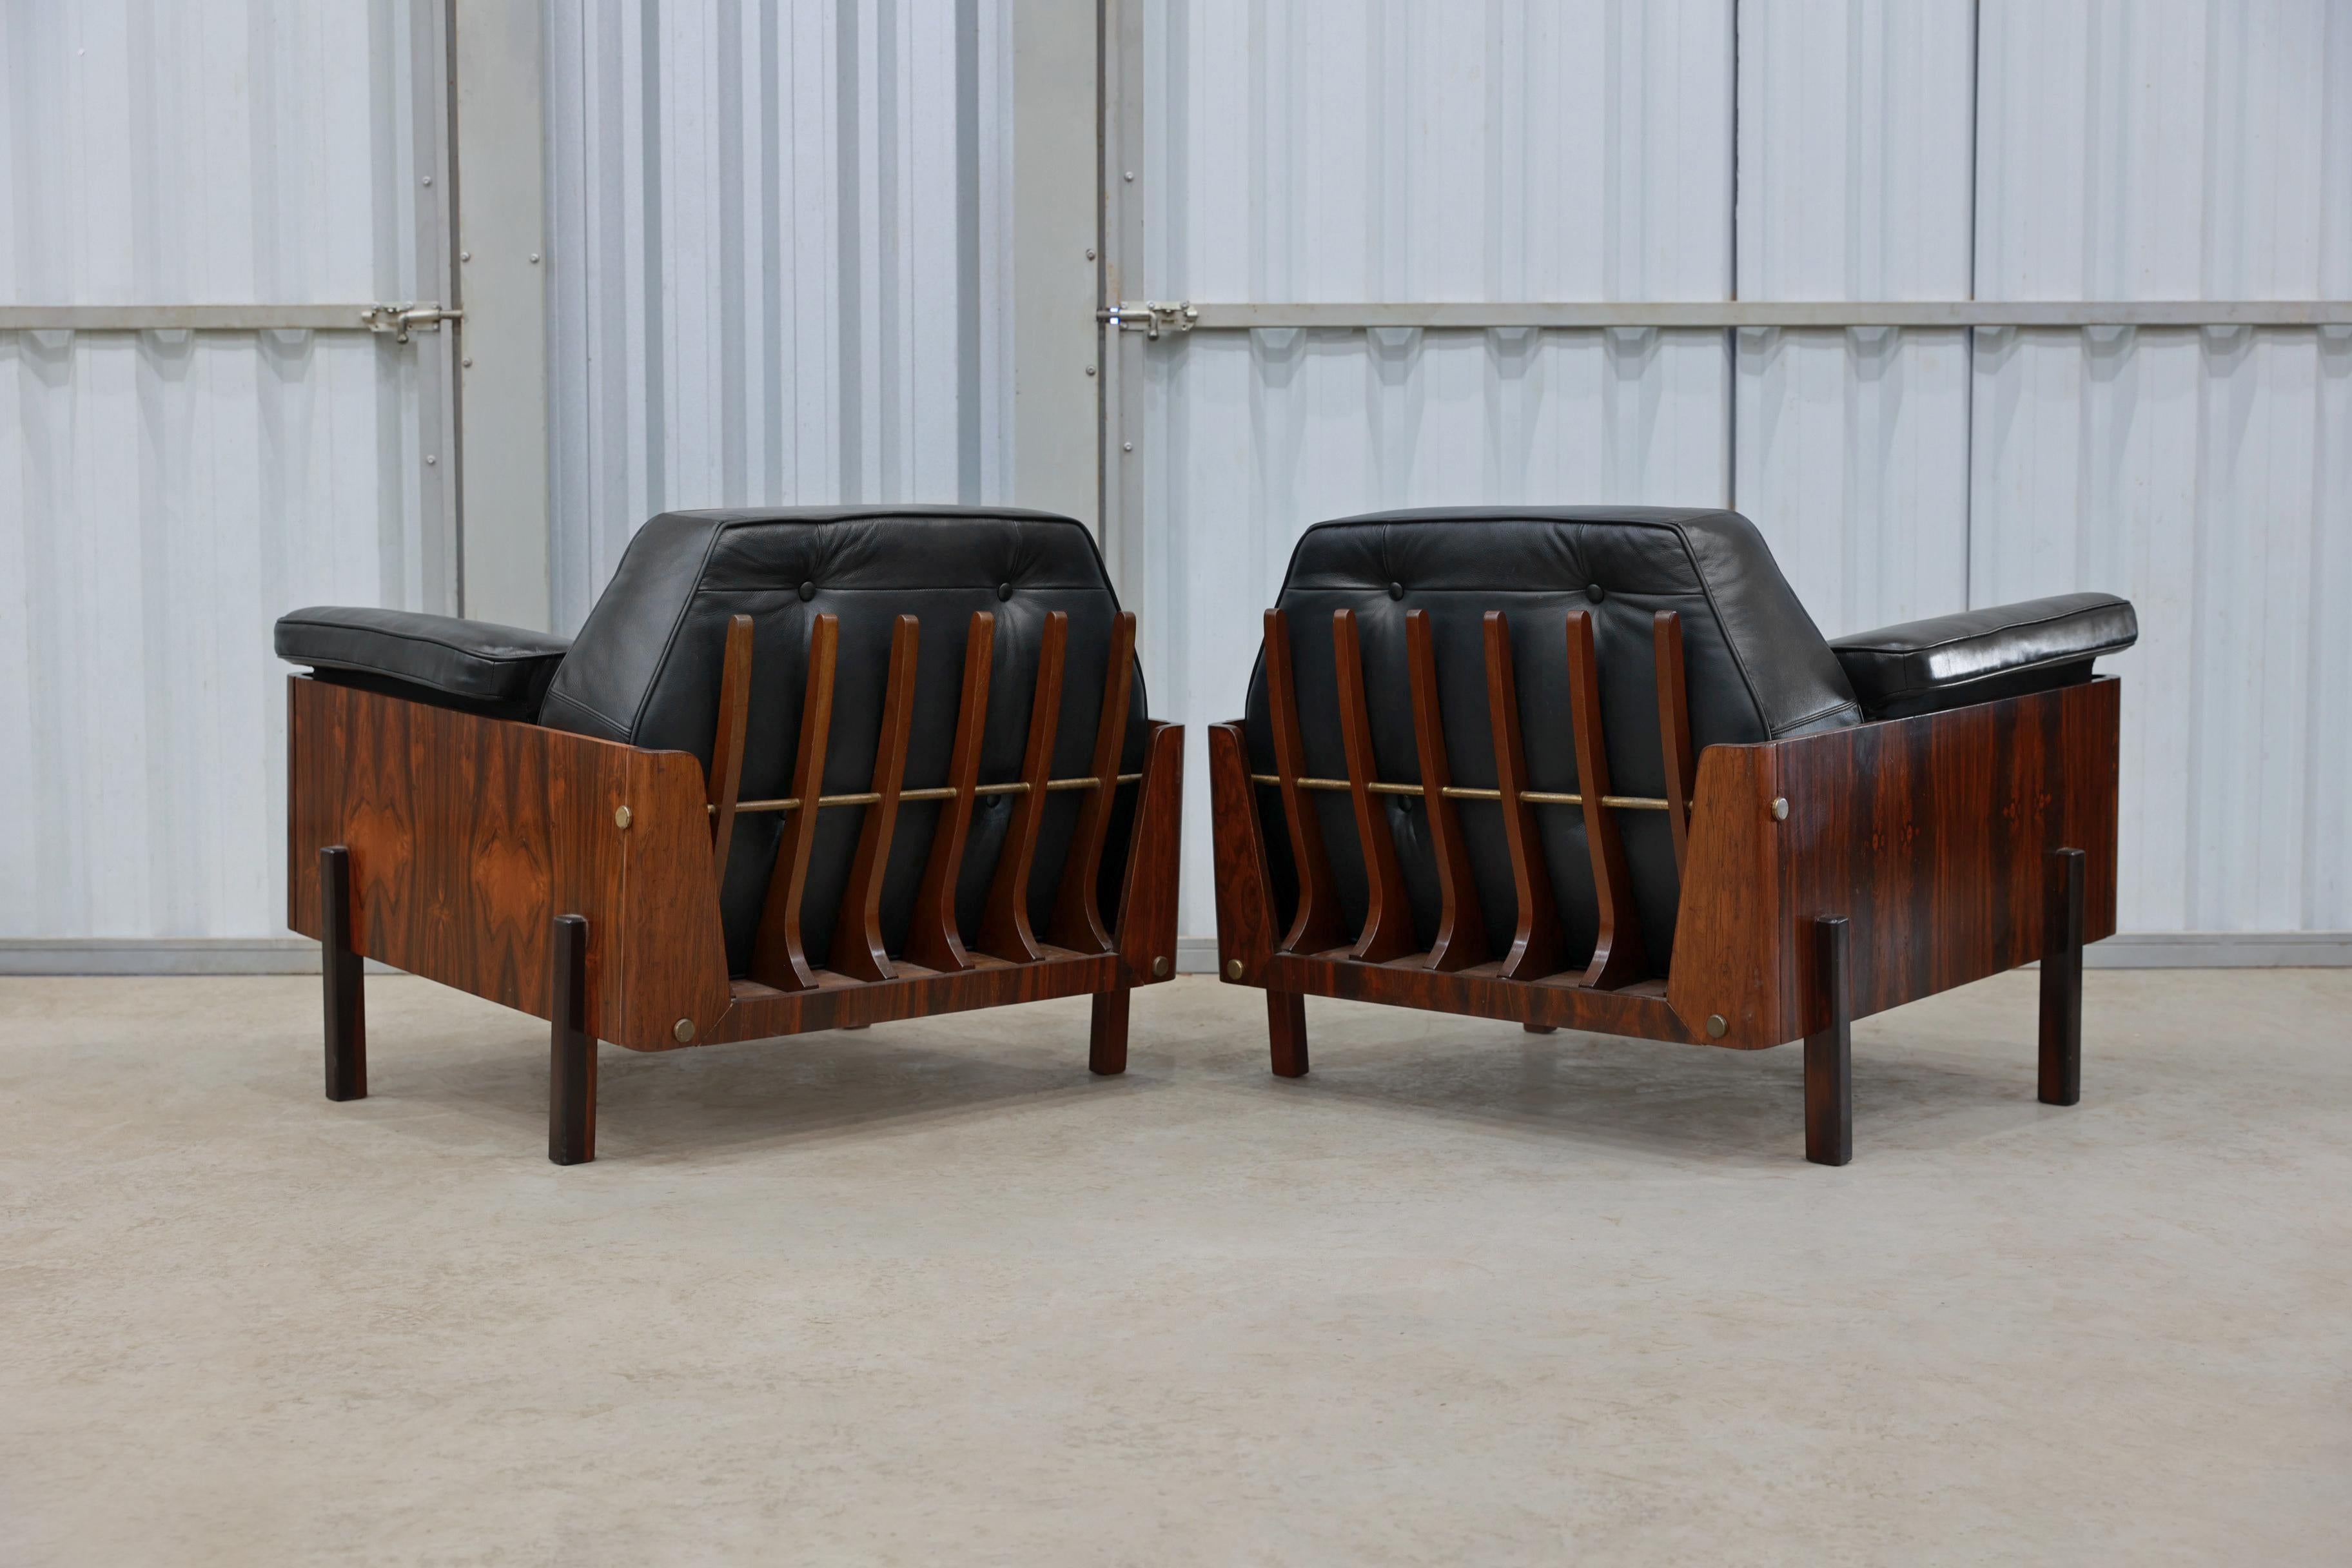 Mid-Century Modern Armchairs in Rosewood & Black Leather by Bertomeu, Brazil In Good Condition For Sale In New York, NY